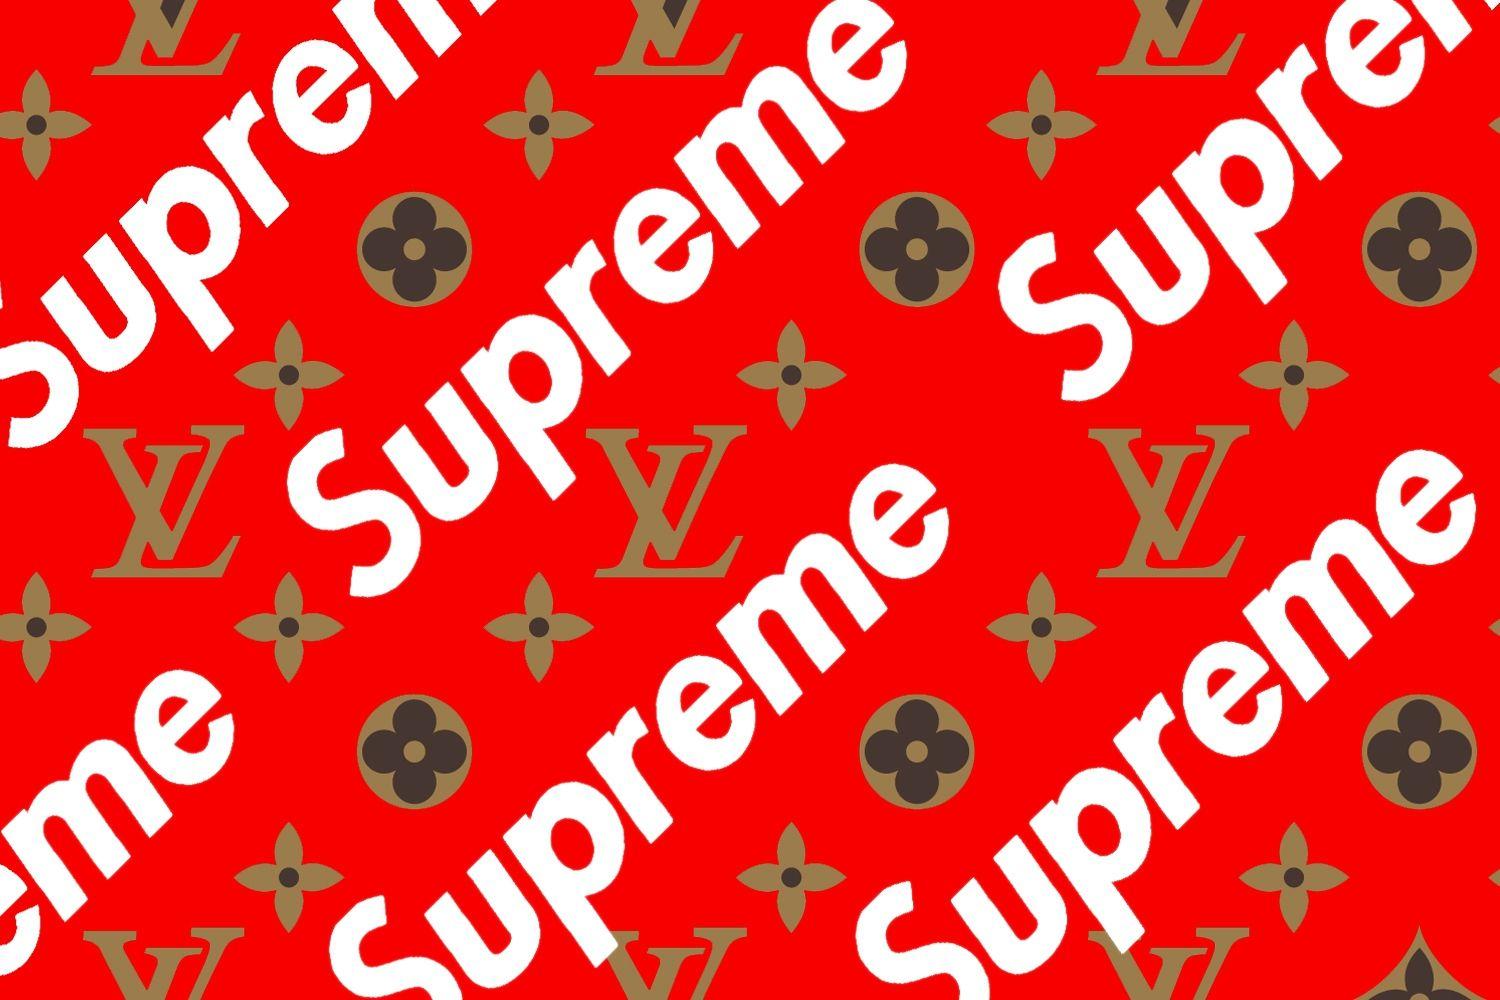 Red Louis Vuitton Logo - Are you ready for today collaboration between Supreme and Louis Vuitton?